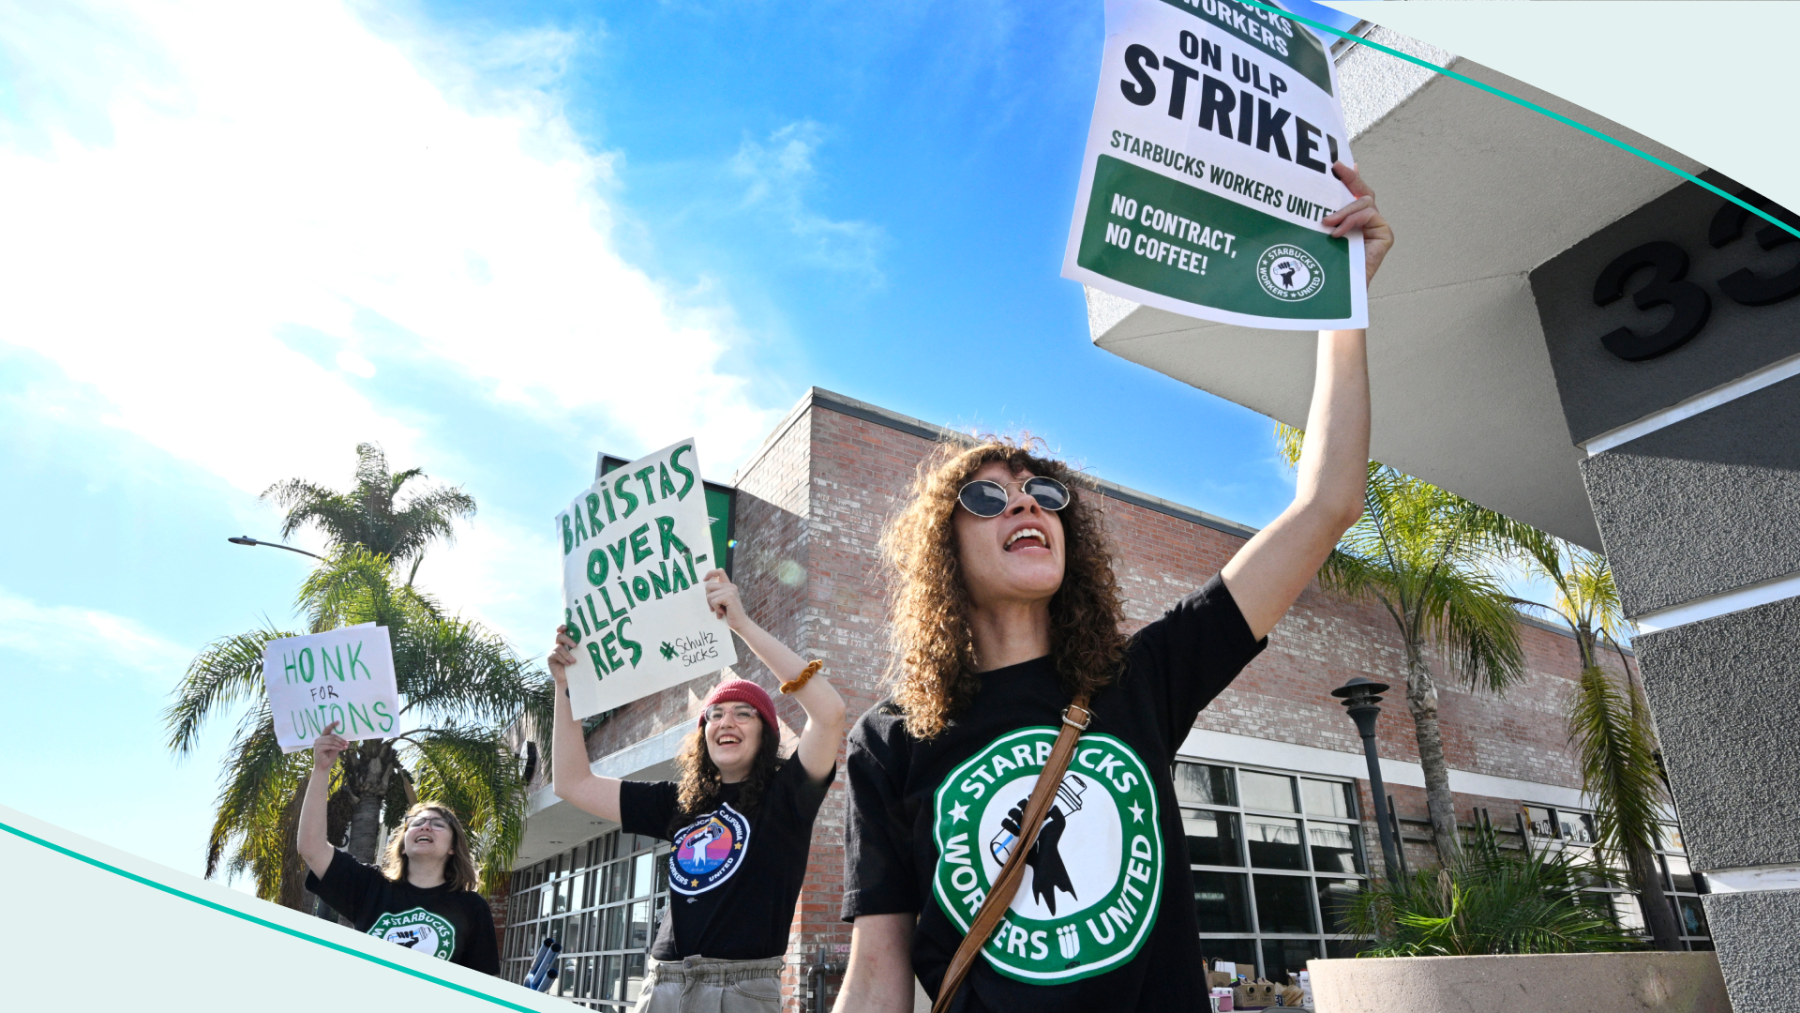 Starbucks employees hold picket signs as they strike in front of a Starbucks store.